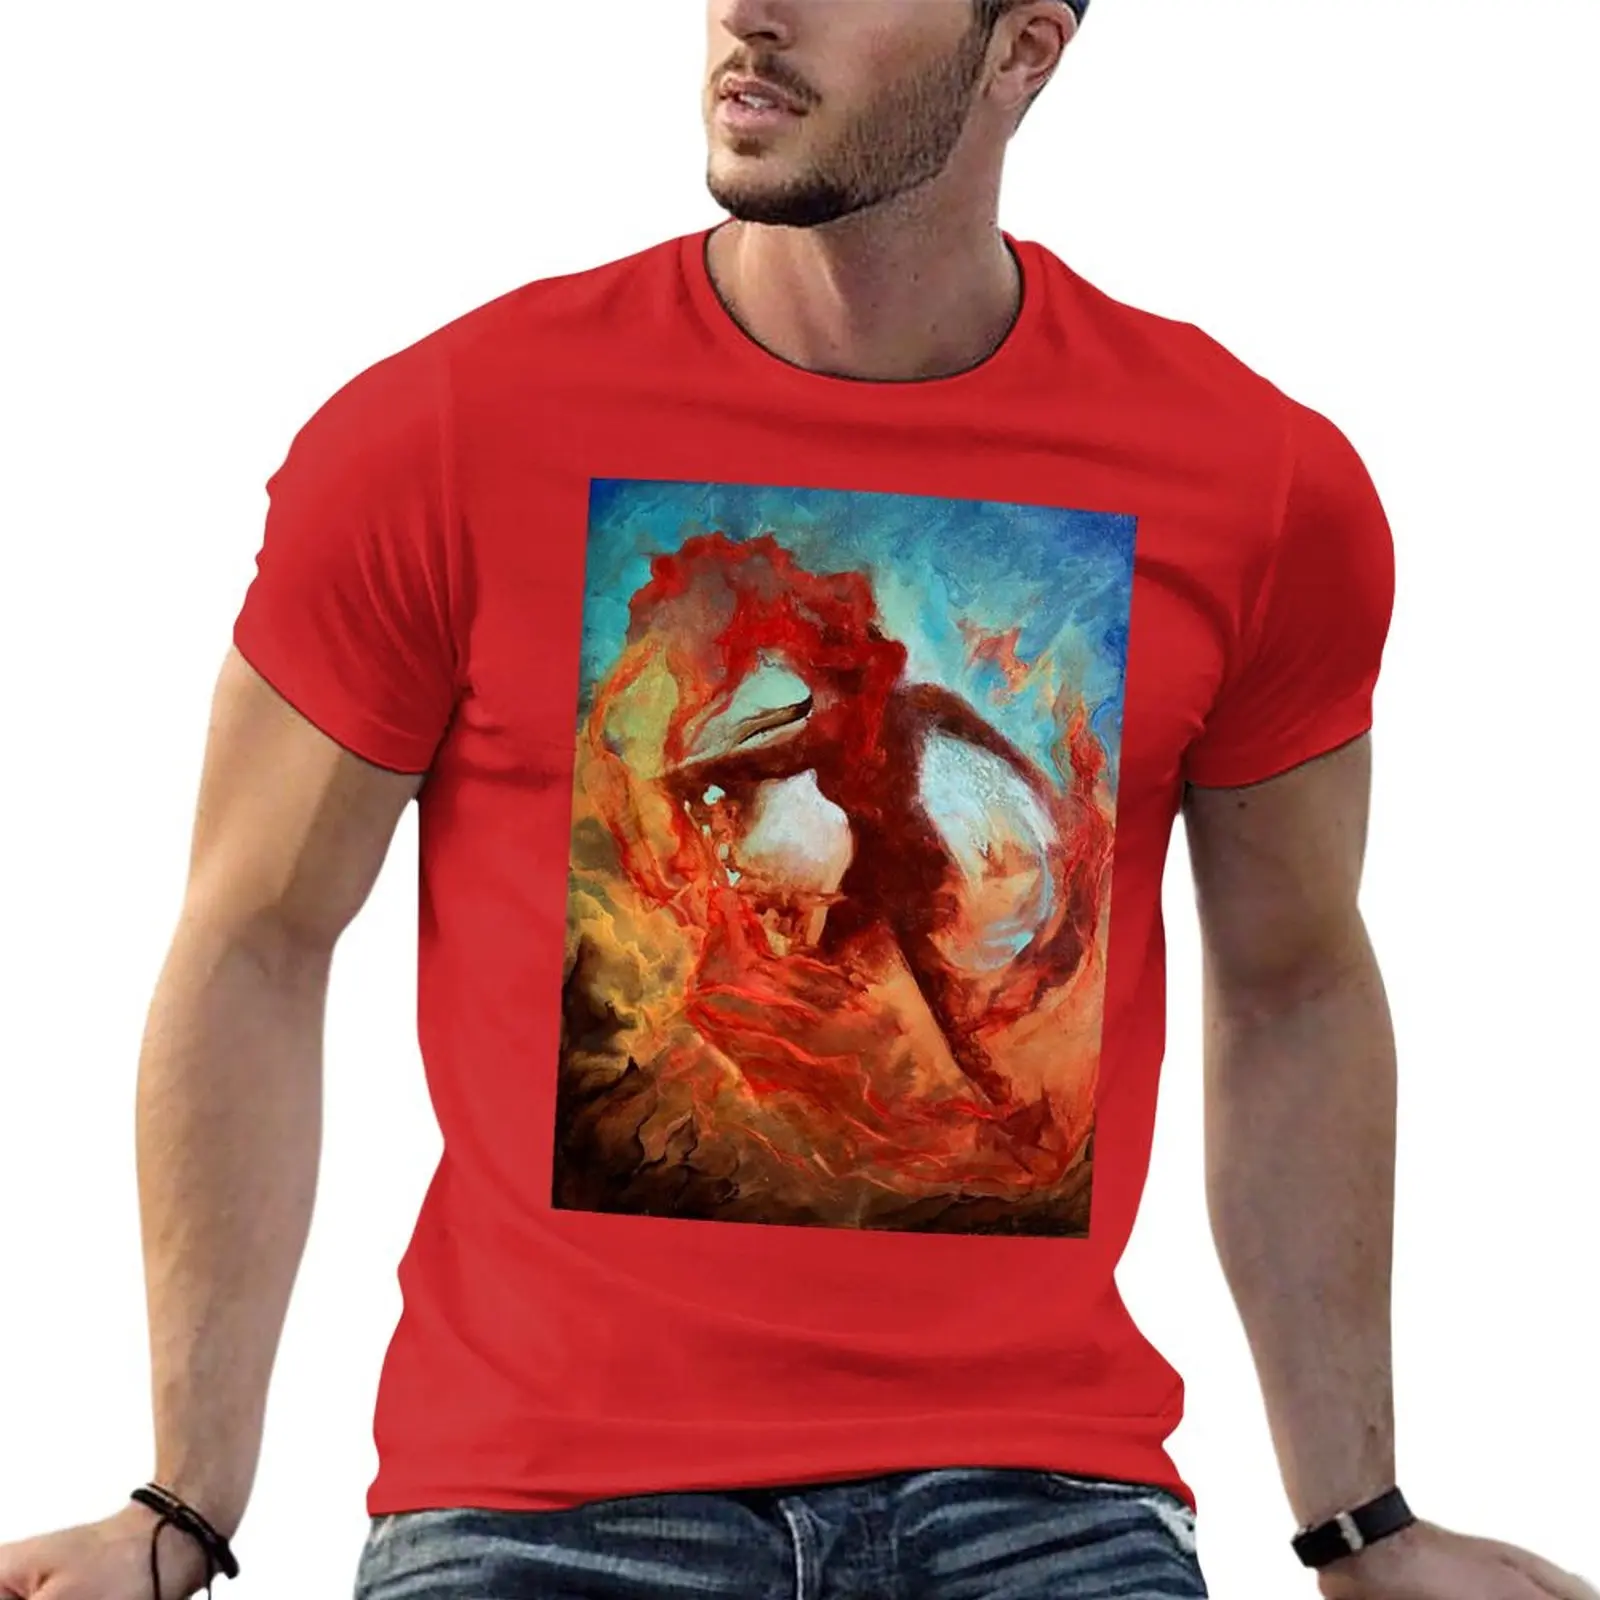 

New Dancing with Fire T-Shirt Tee shirt custom t shirts design your own graphics t shirt anime men graphic t shirts